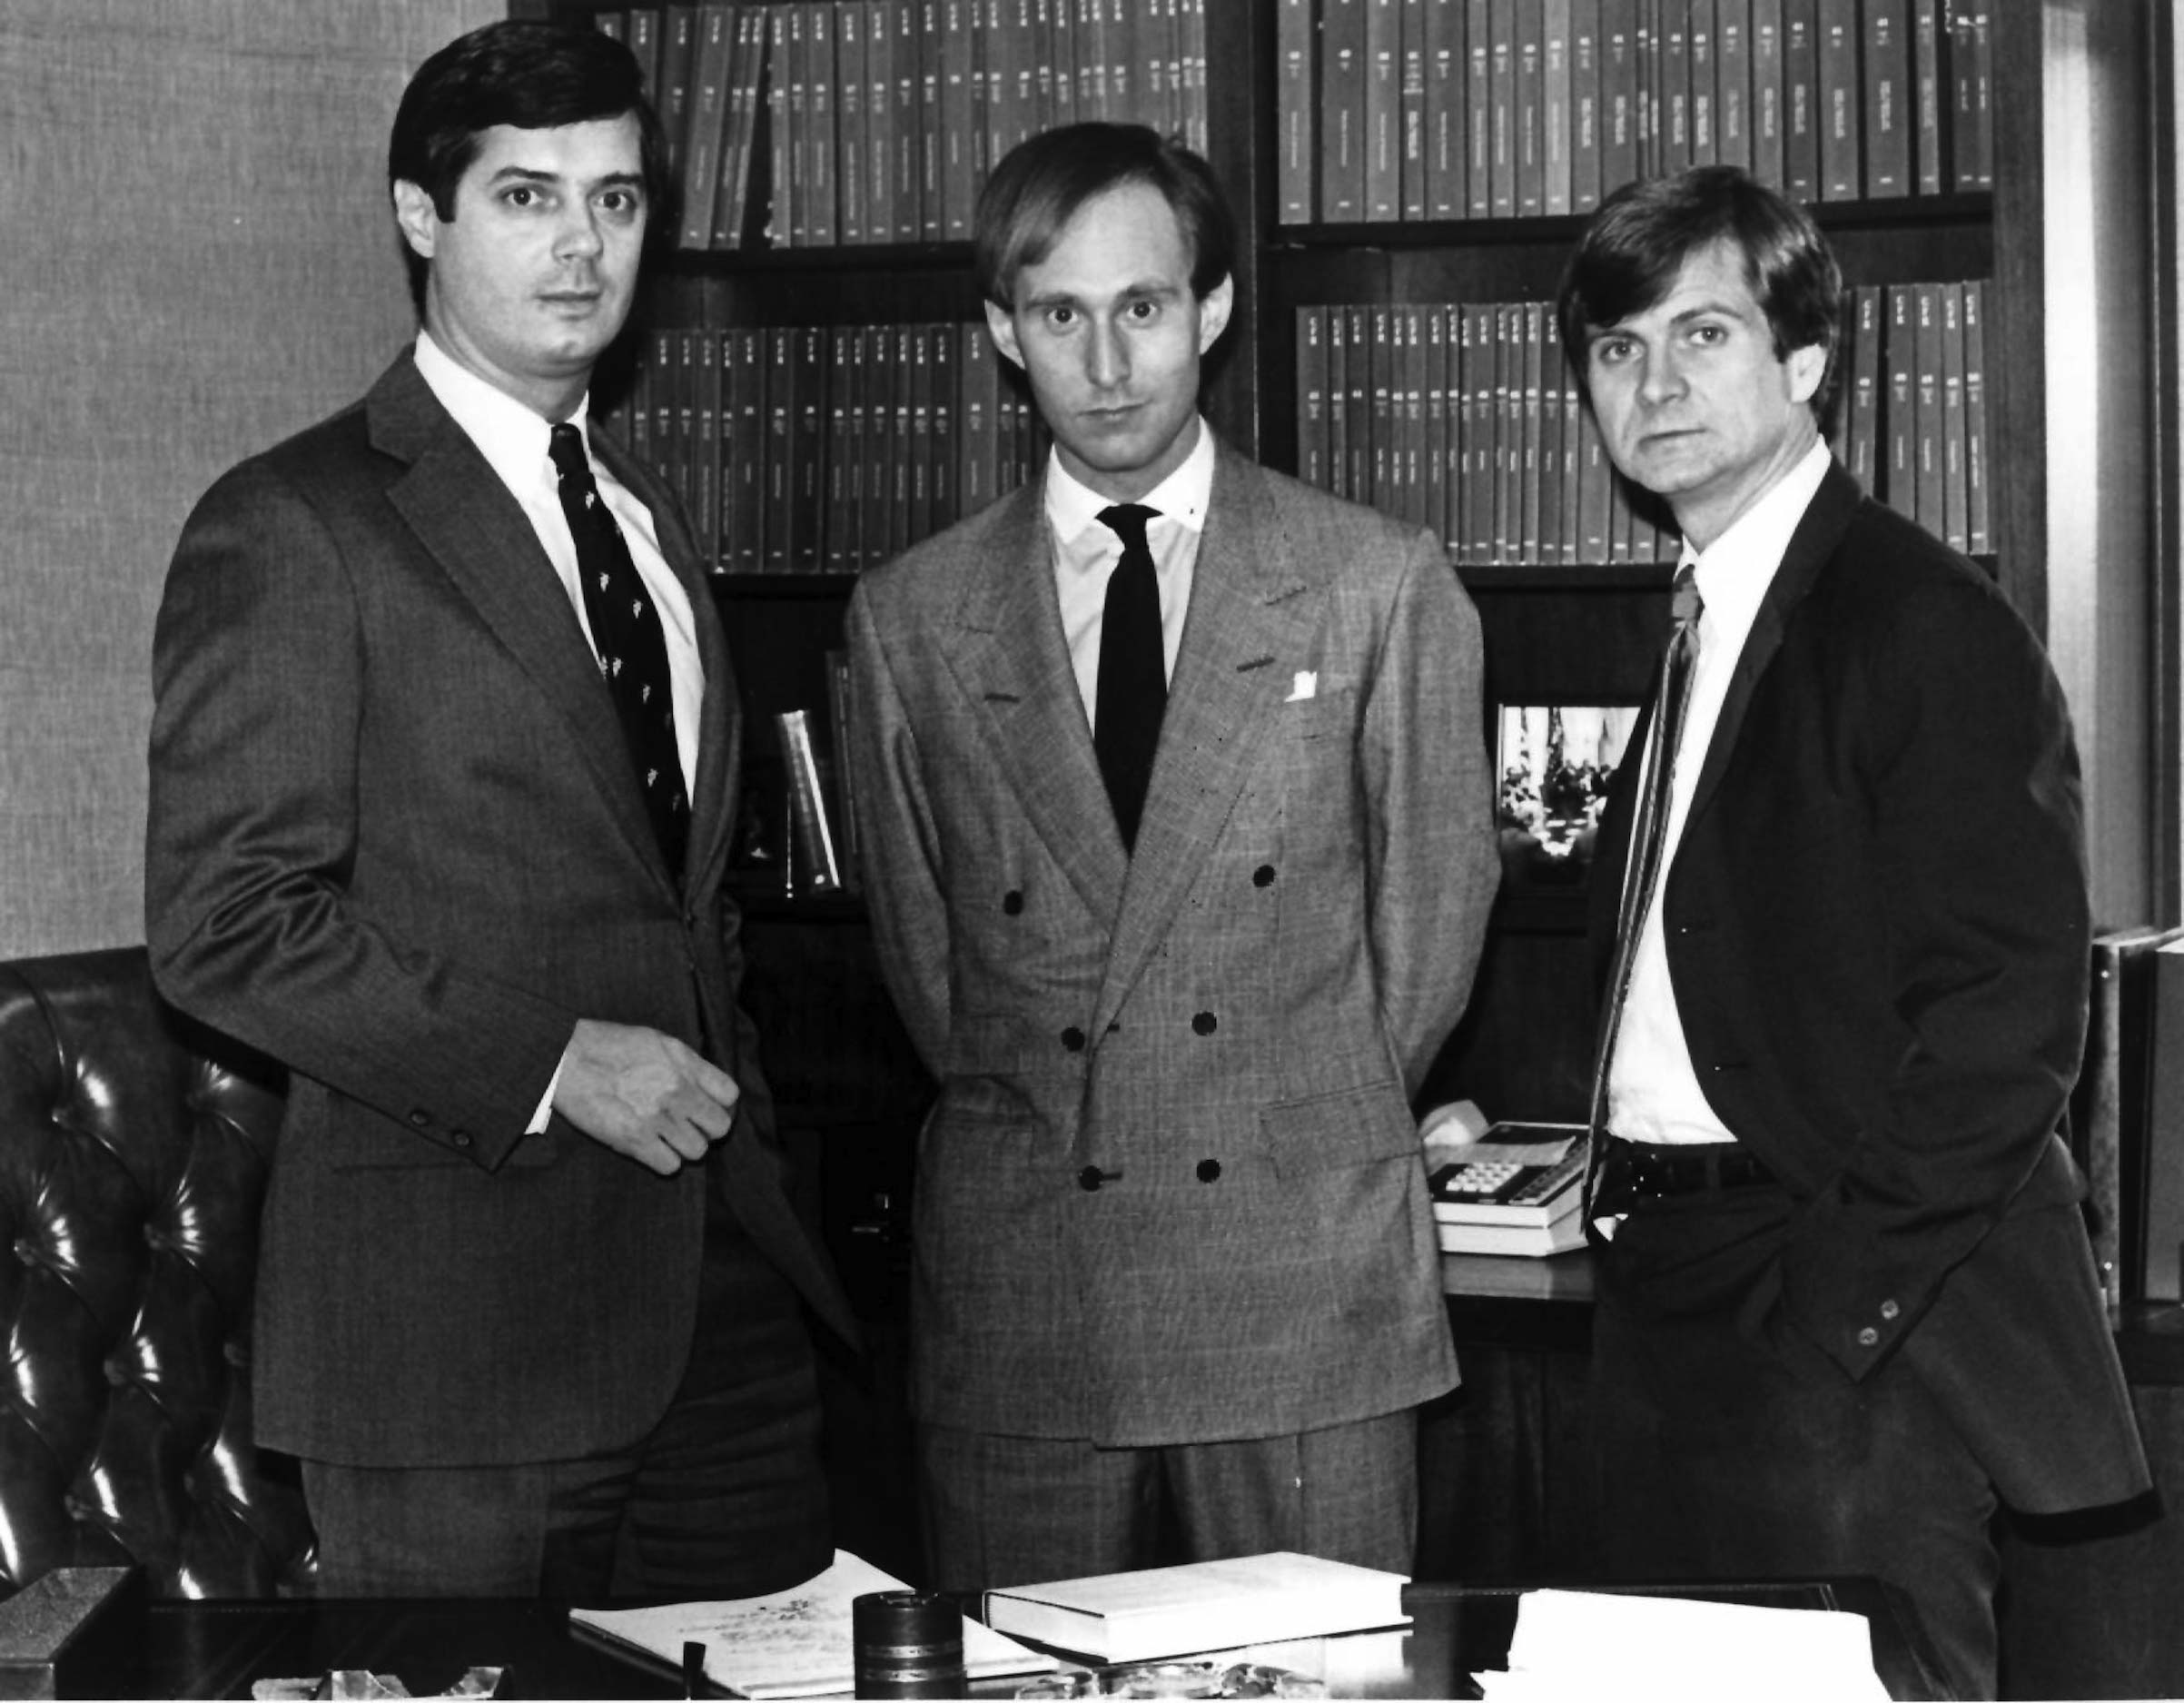 Paul Manafort, Roger Stone and Lee Atwater on March 21, 1985. (Harry Naltchayan—The Washington Post/Getty Images)